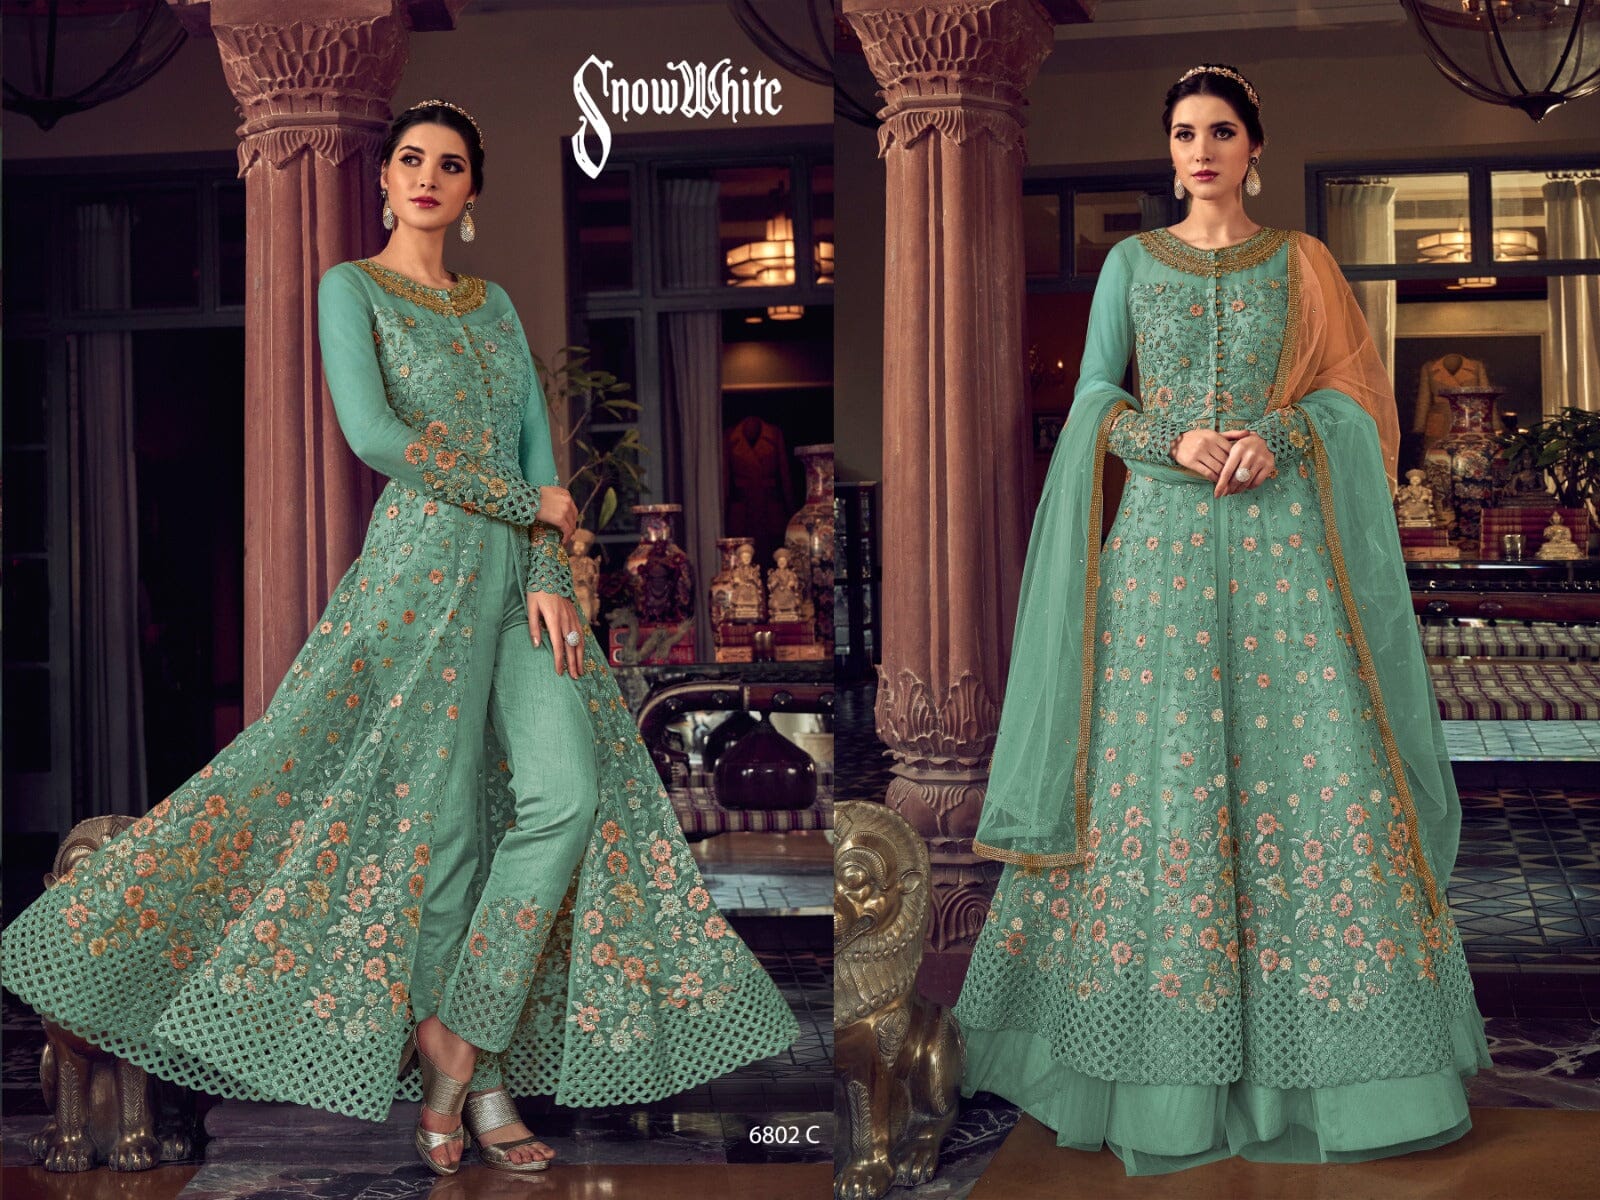 Light Blue Butterfly Net Designer Suit with Skirt and Embroidered Pants Designer Suits Shopin Di Apparels 